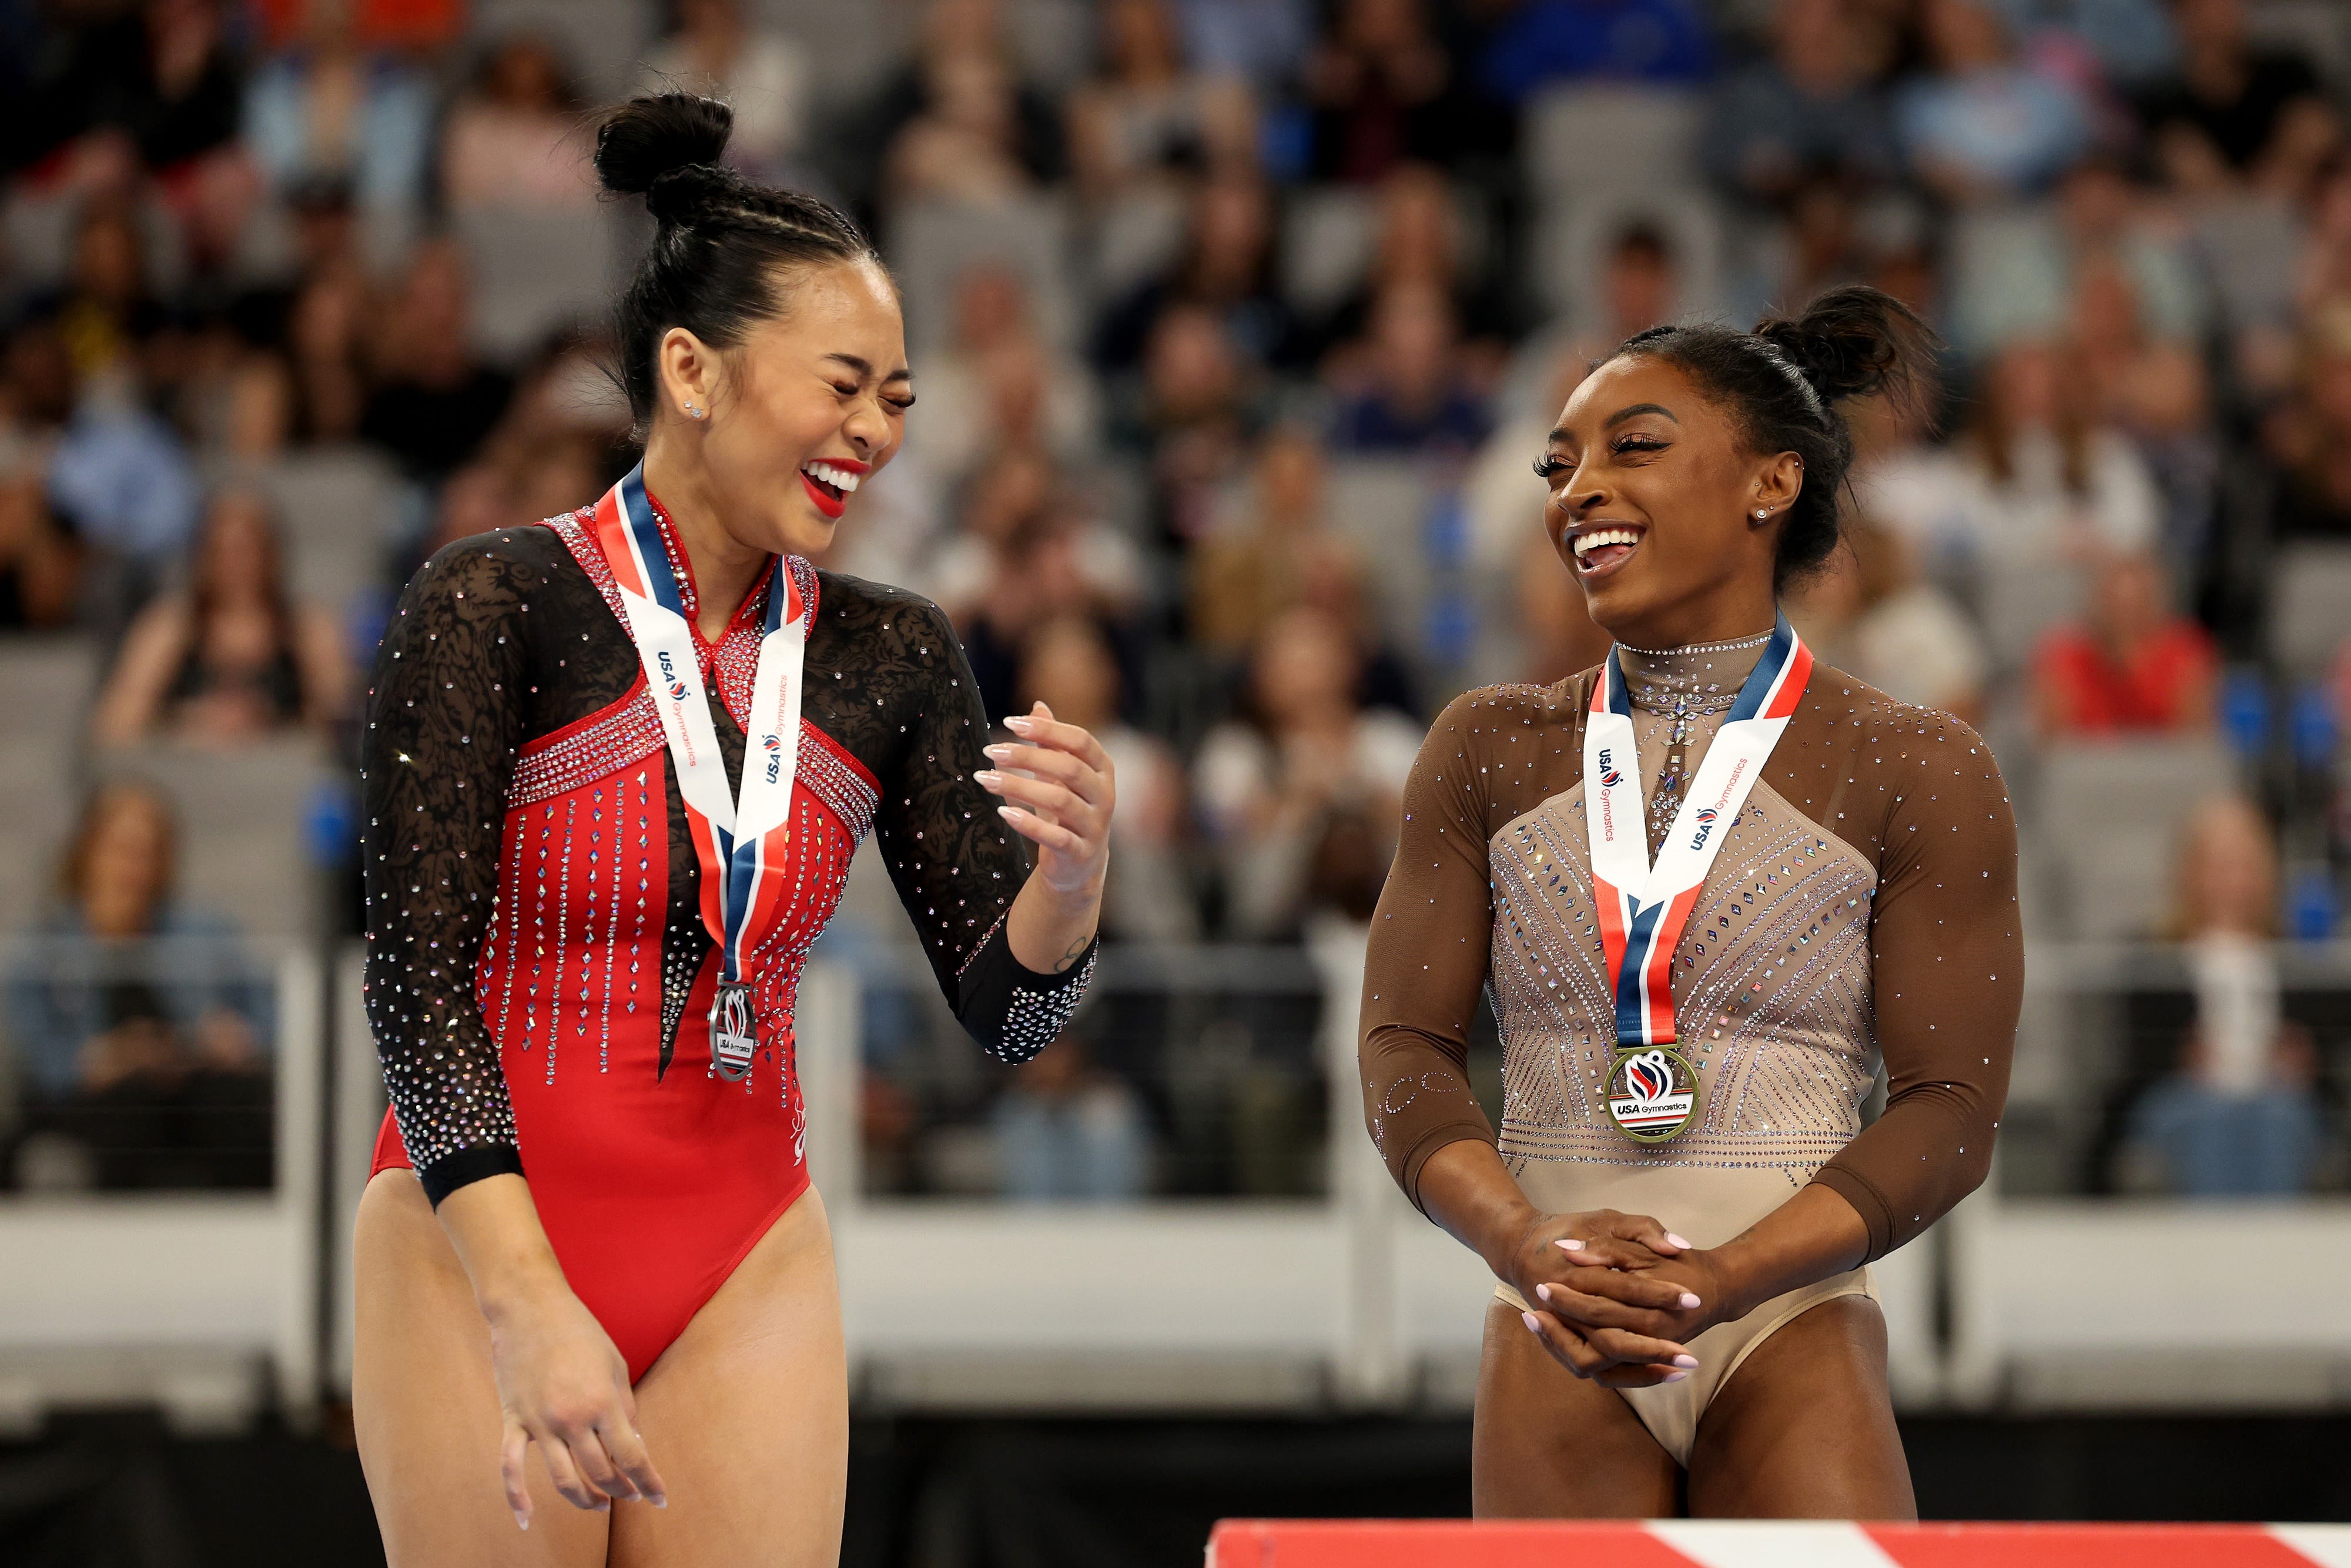 Sunisa Lee’s vault went awry. Simone Biles stepped in to help.